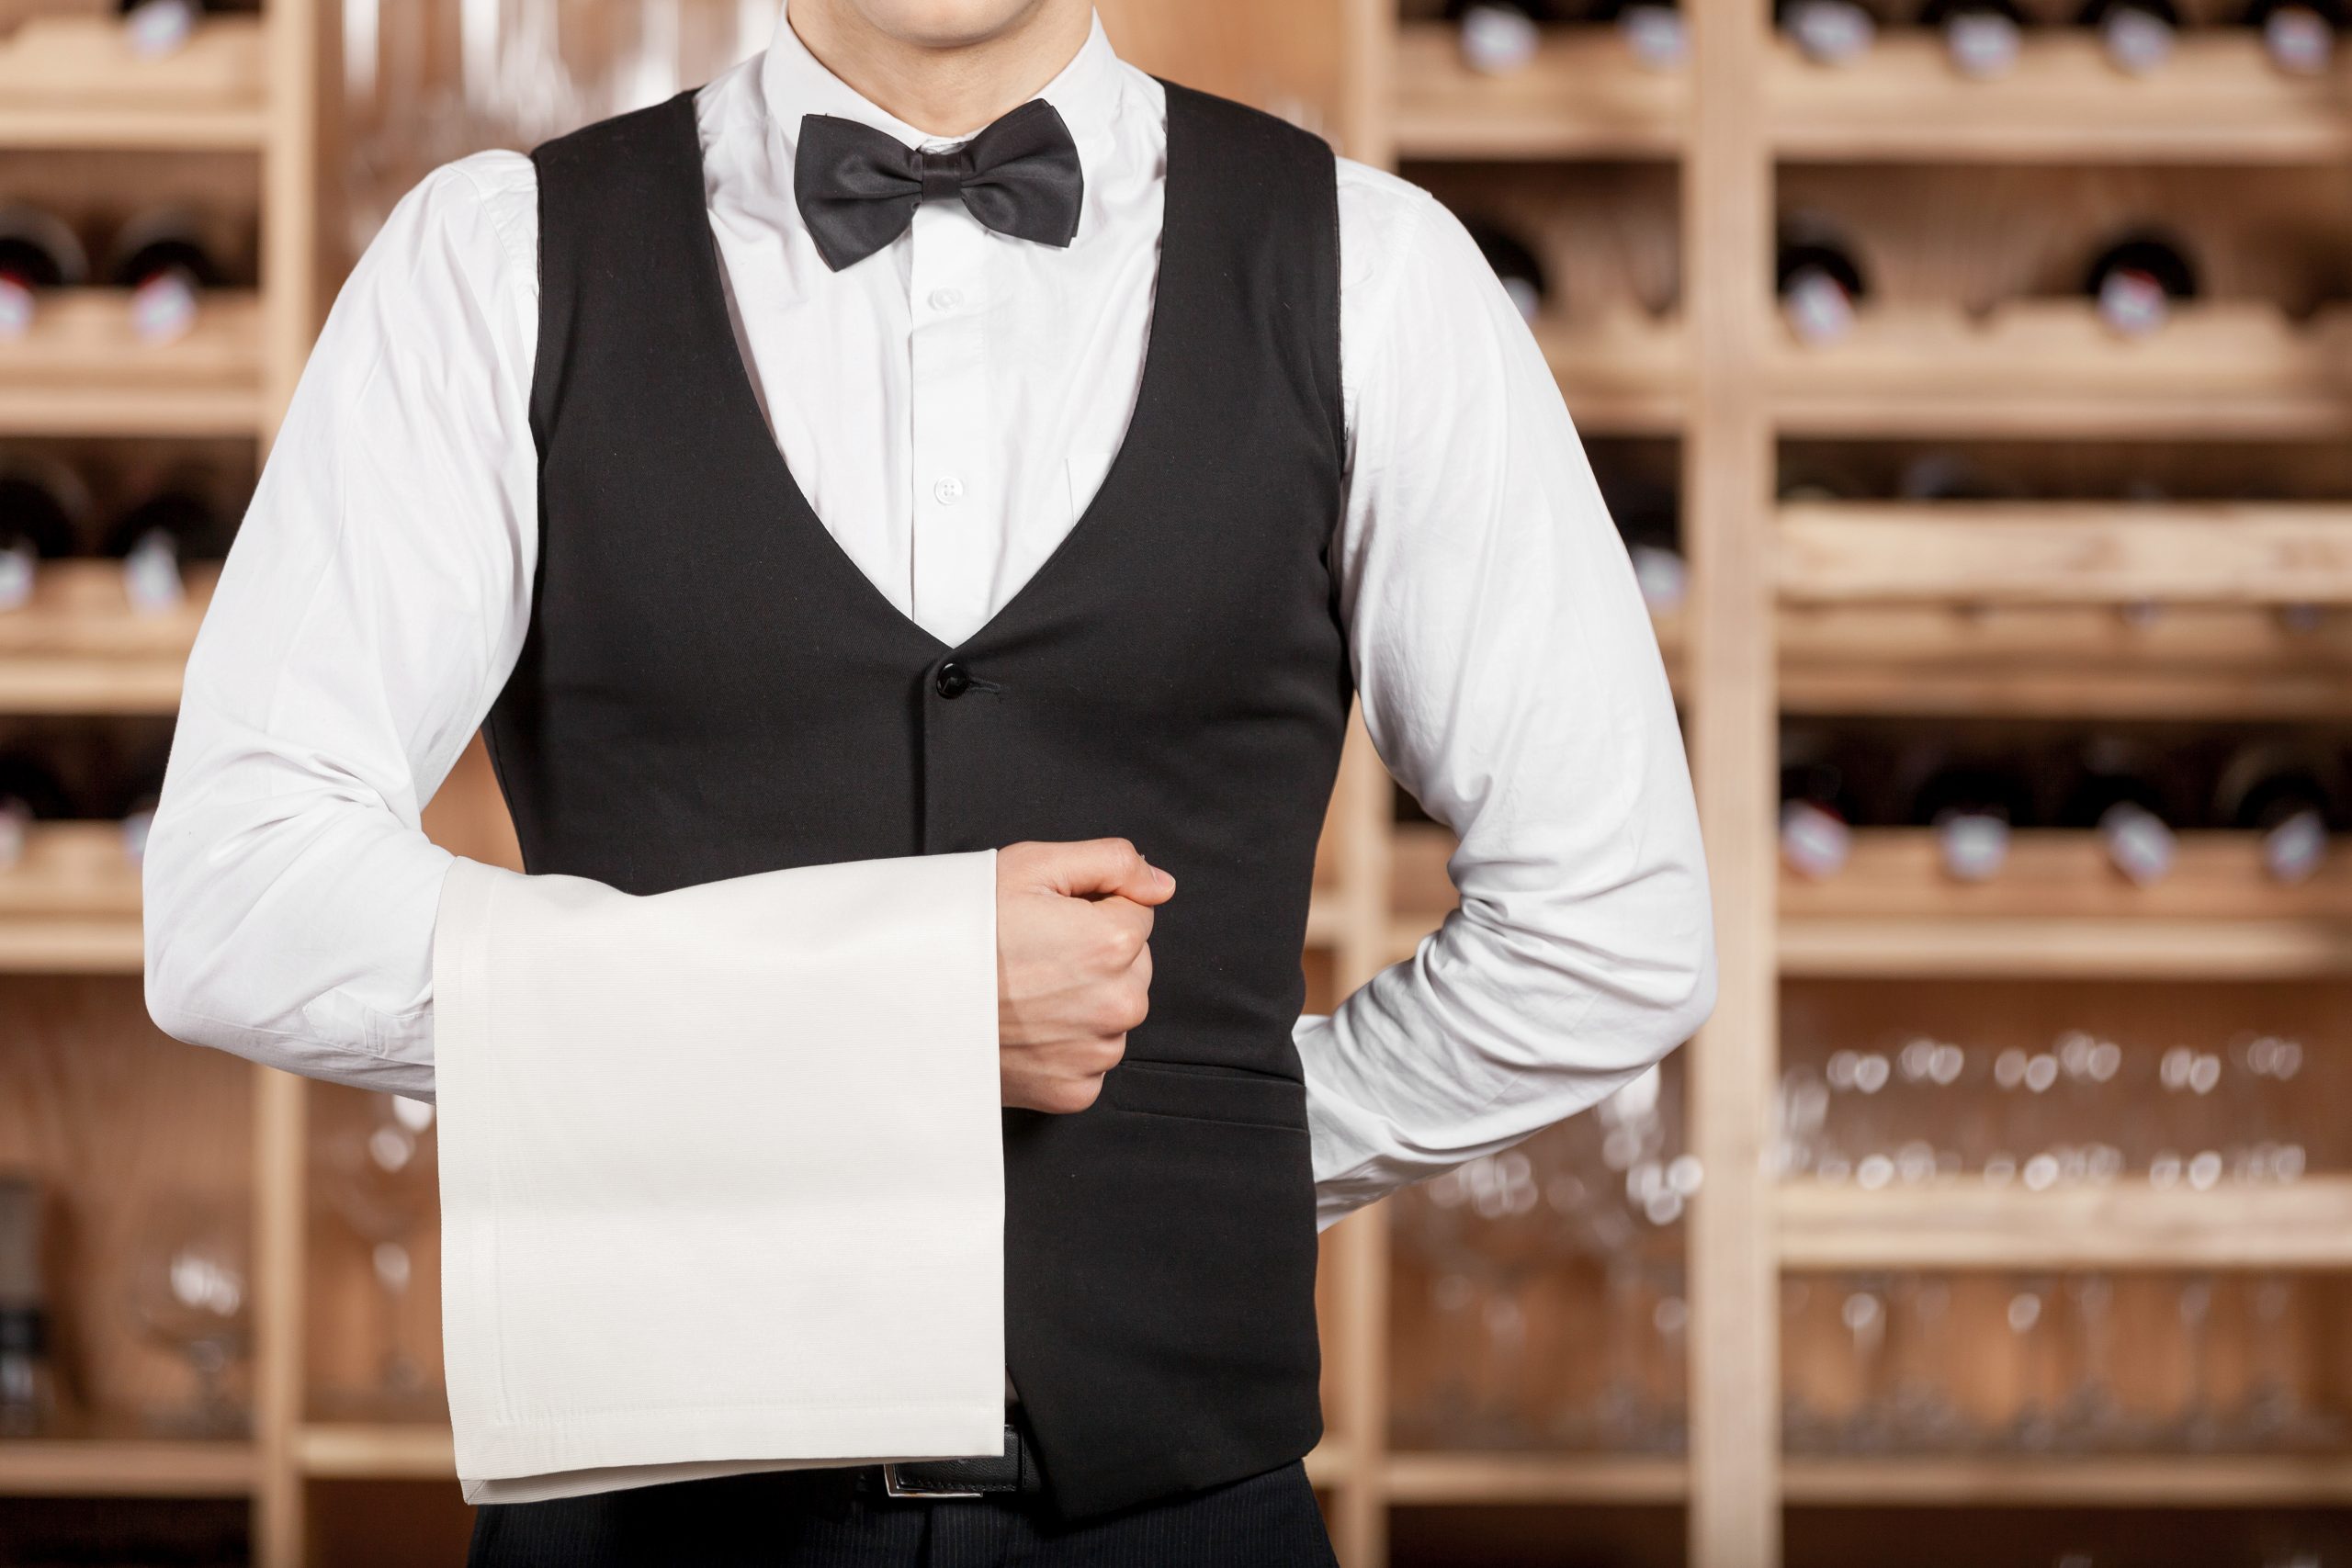 Confident waiter. Cropped image of confident young waiter standing in front of wine shelf and holding a towel on his hand